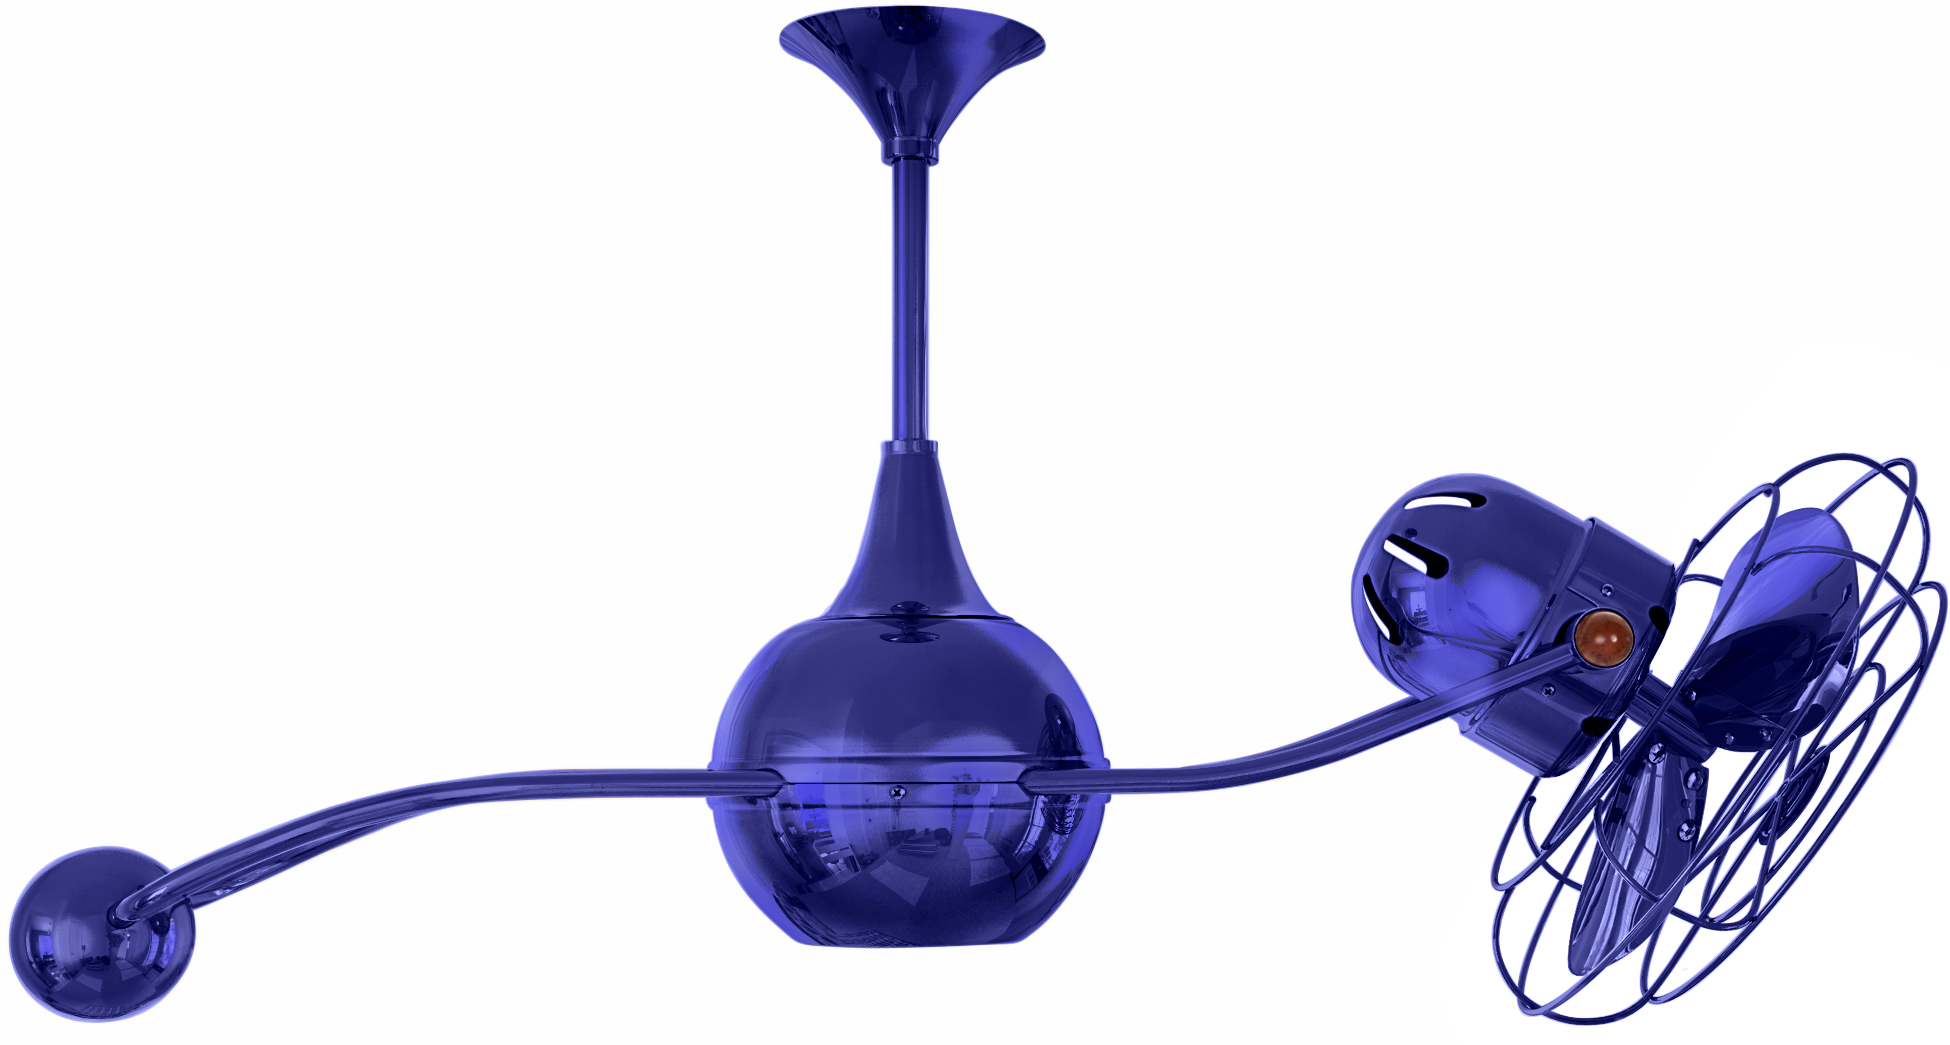 Brisa 2000 ceiling fan in blue / safira finish with metal blades in decorative cage made by Matthews Fan Company.